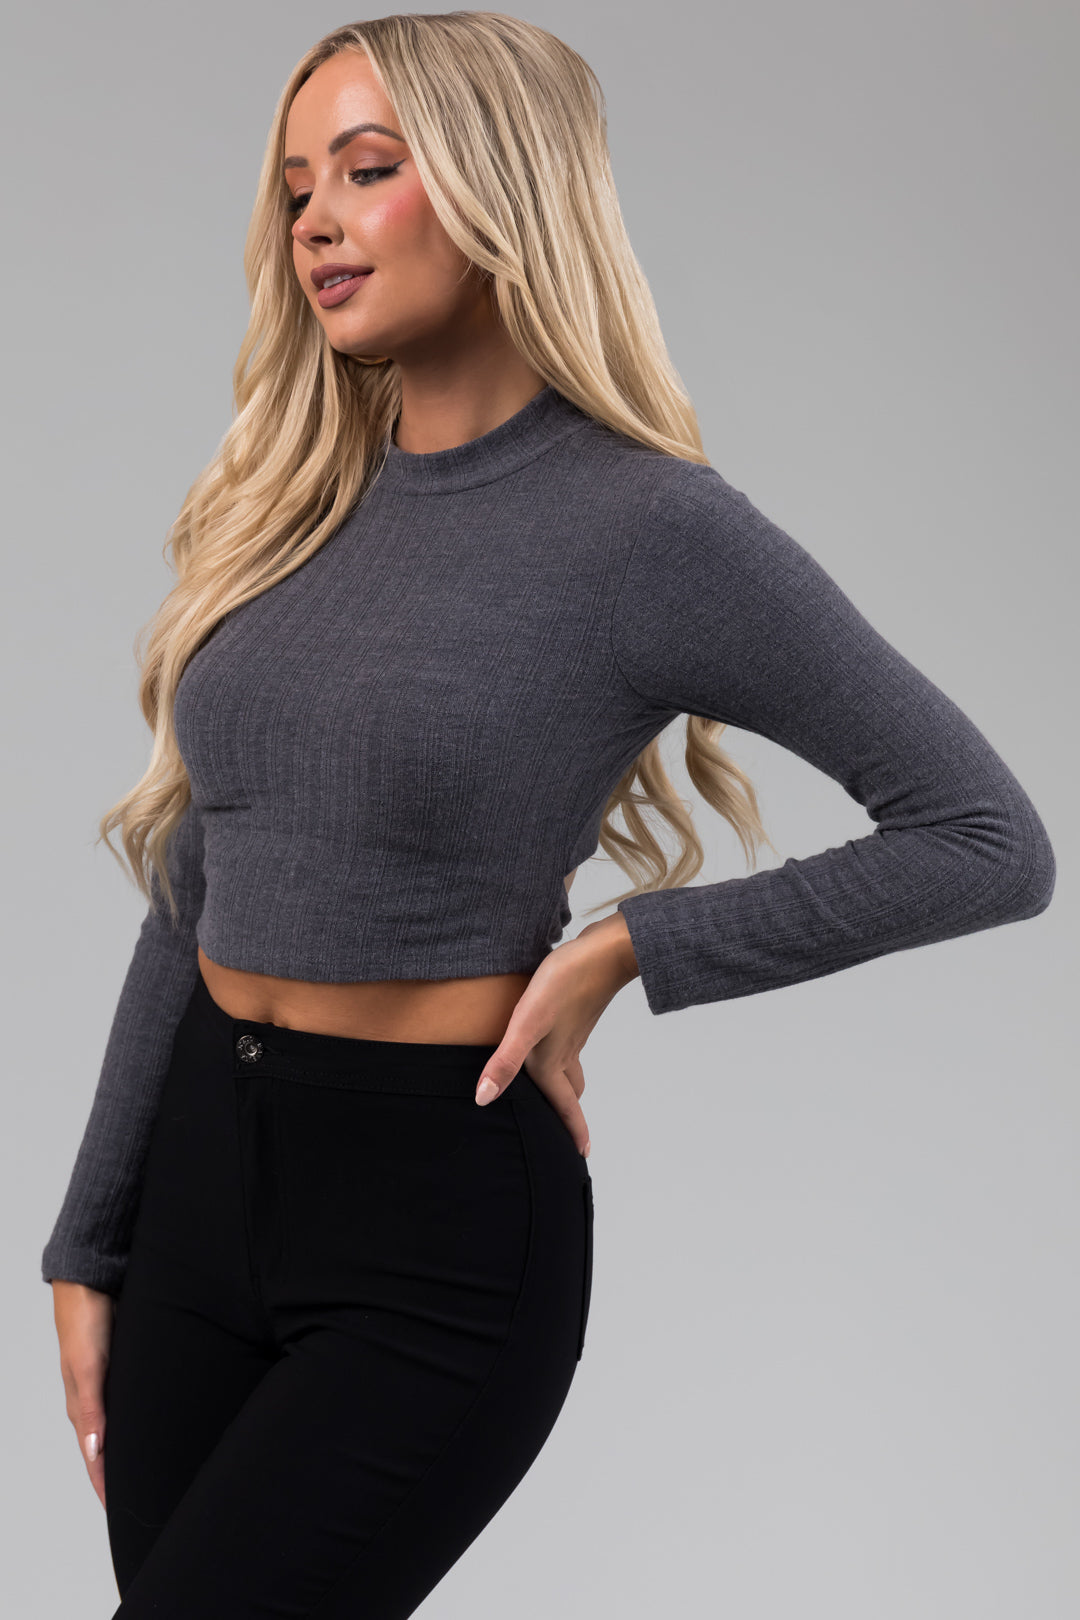 Stormy Grey Criss Cross Cut Out Back Crop Top